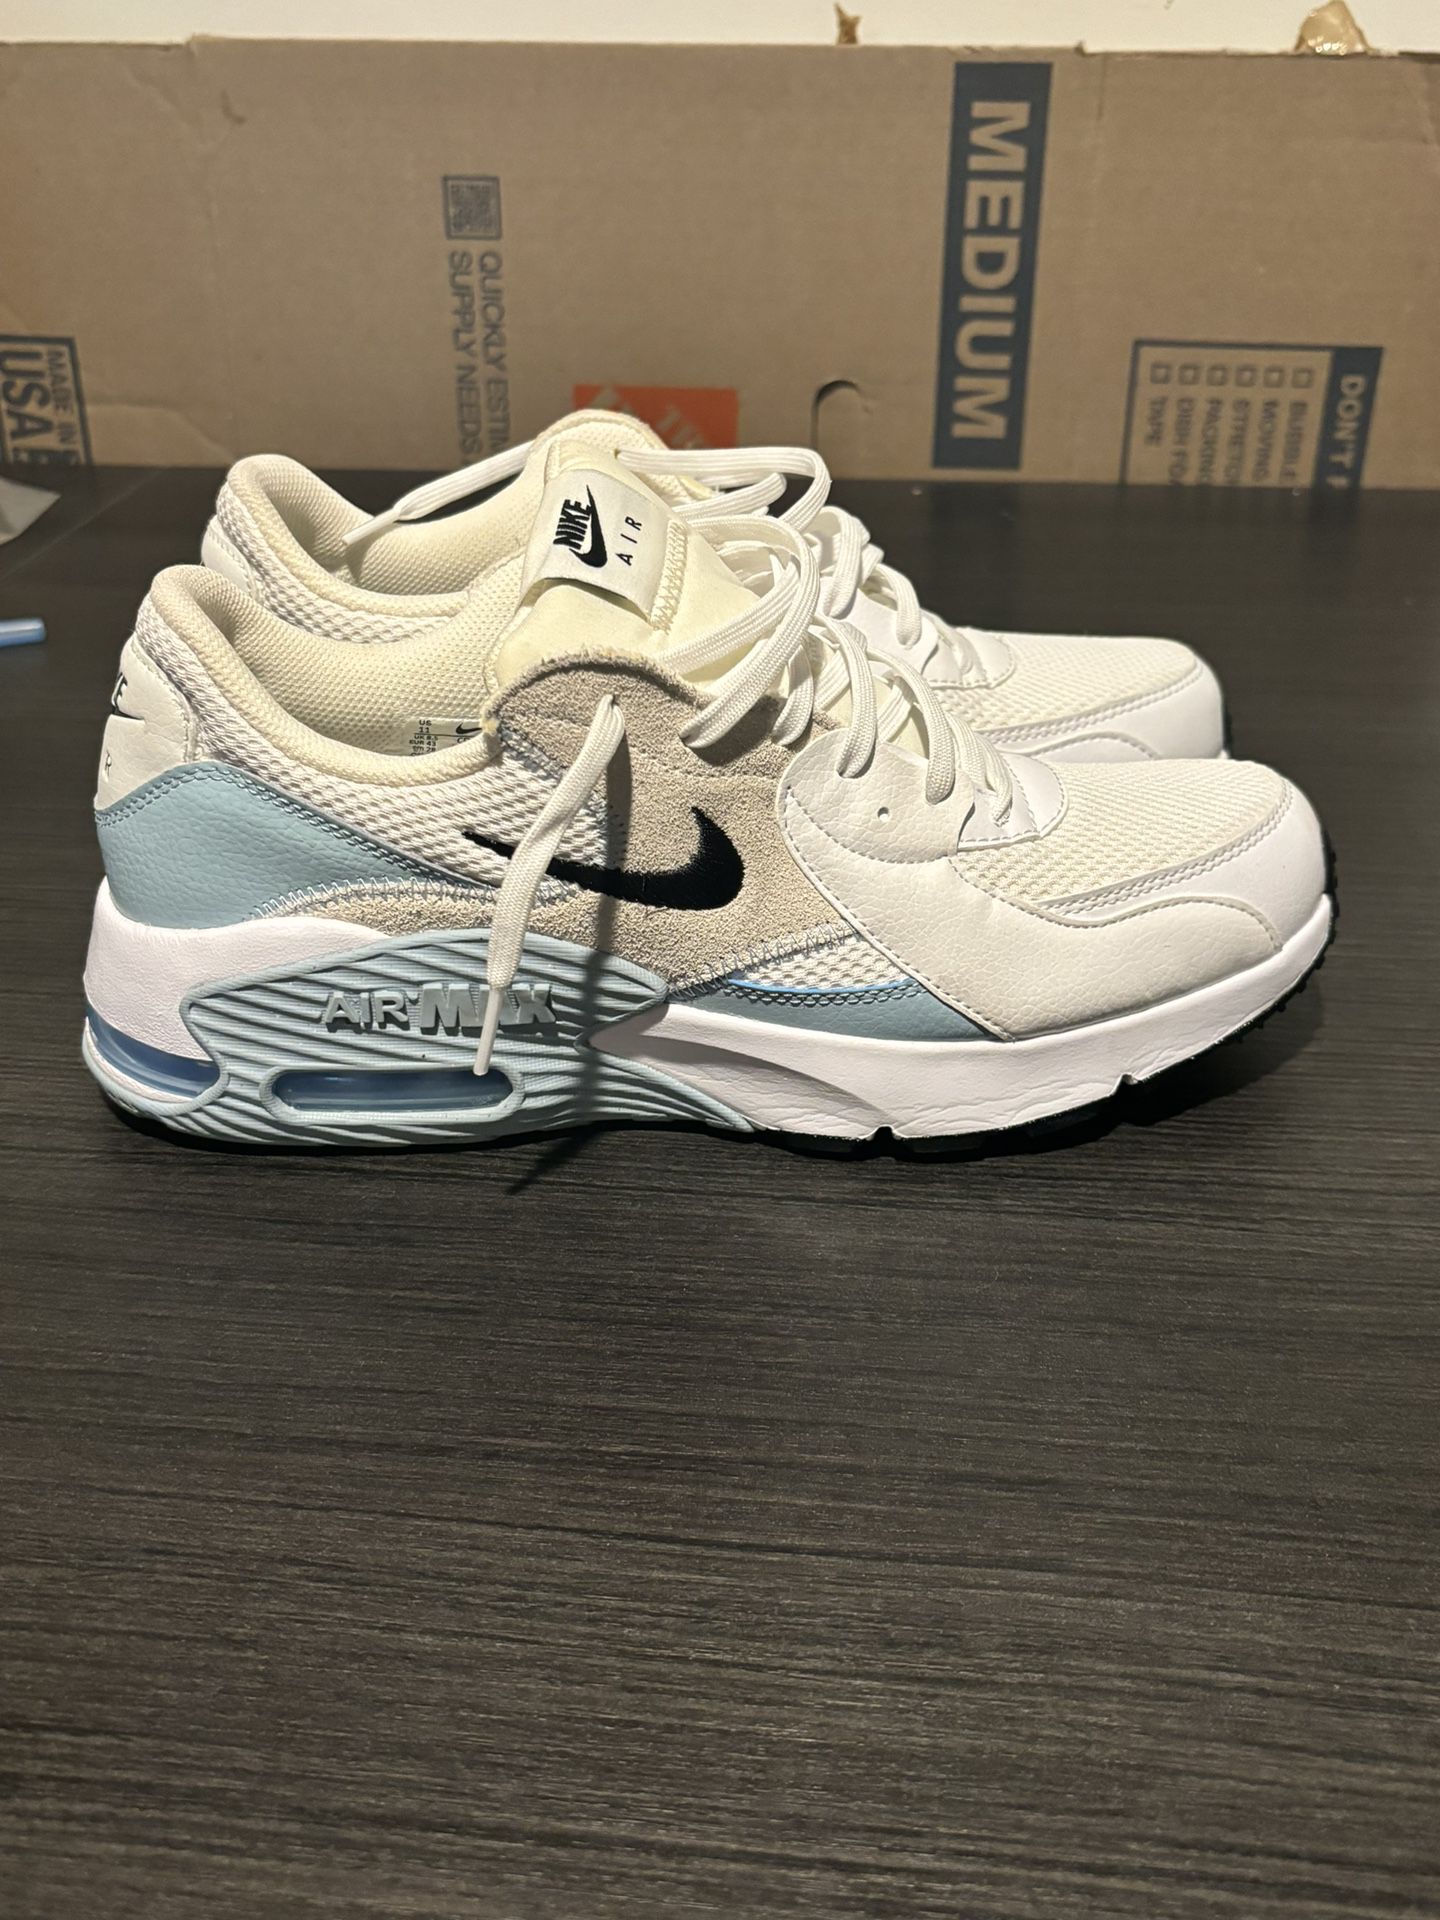 $25Nike Women's Air Max Excee Shoes size 11